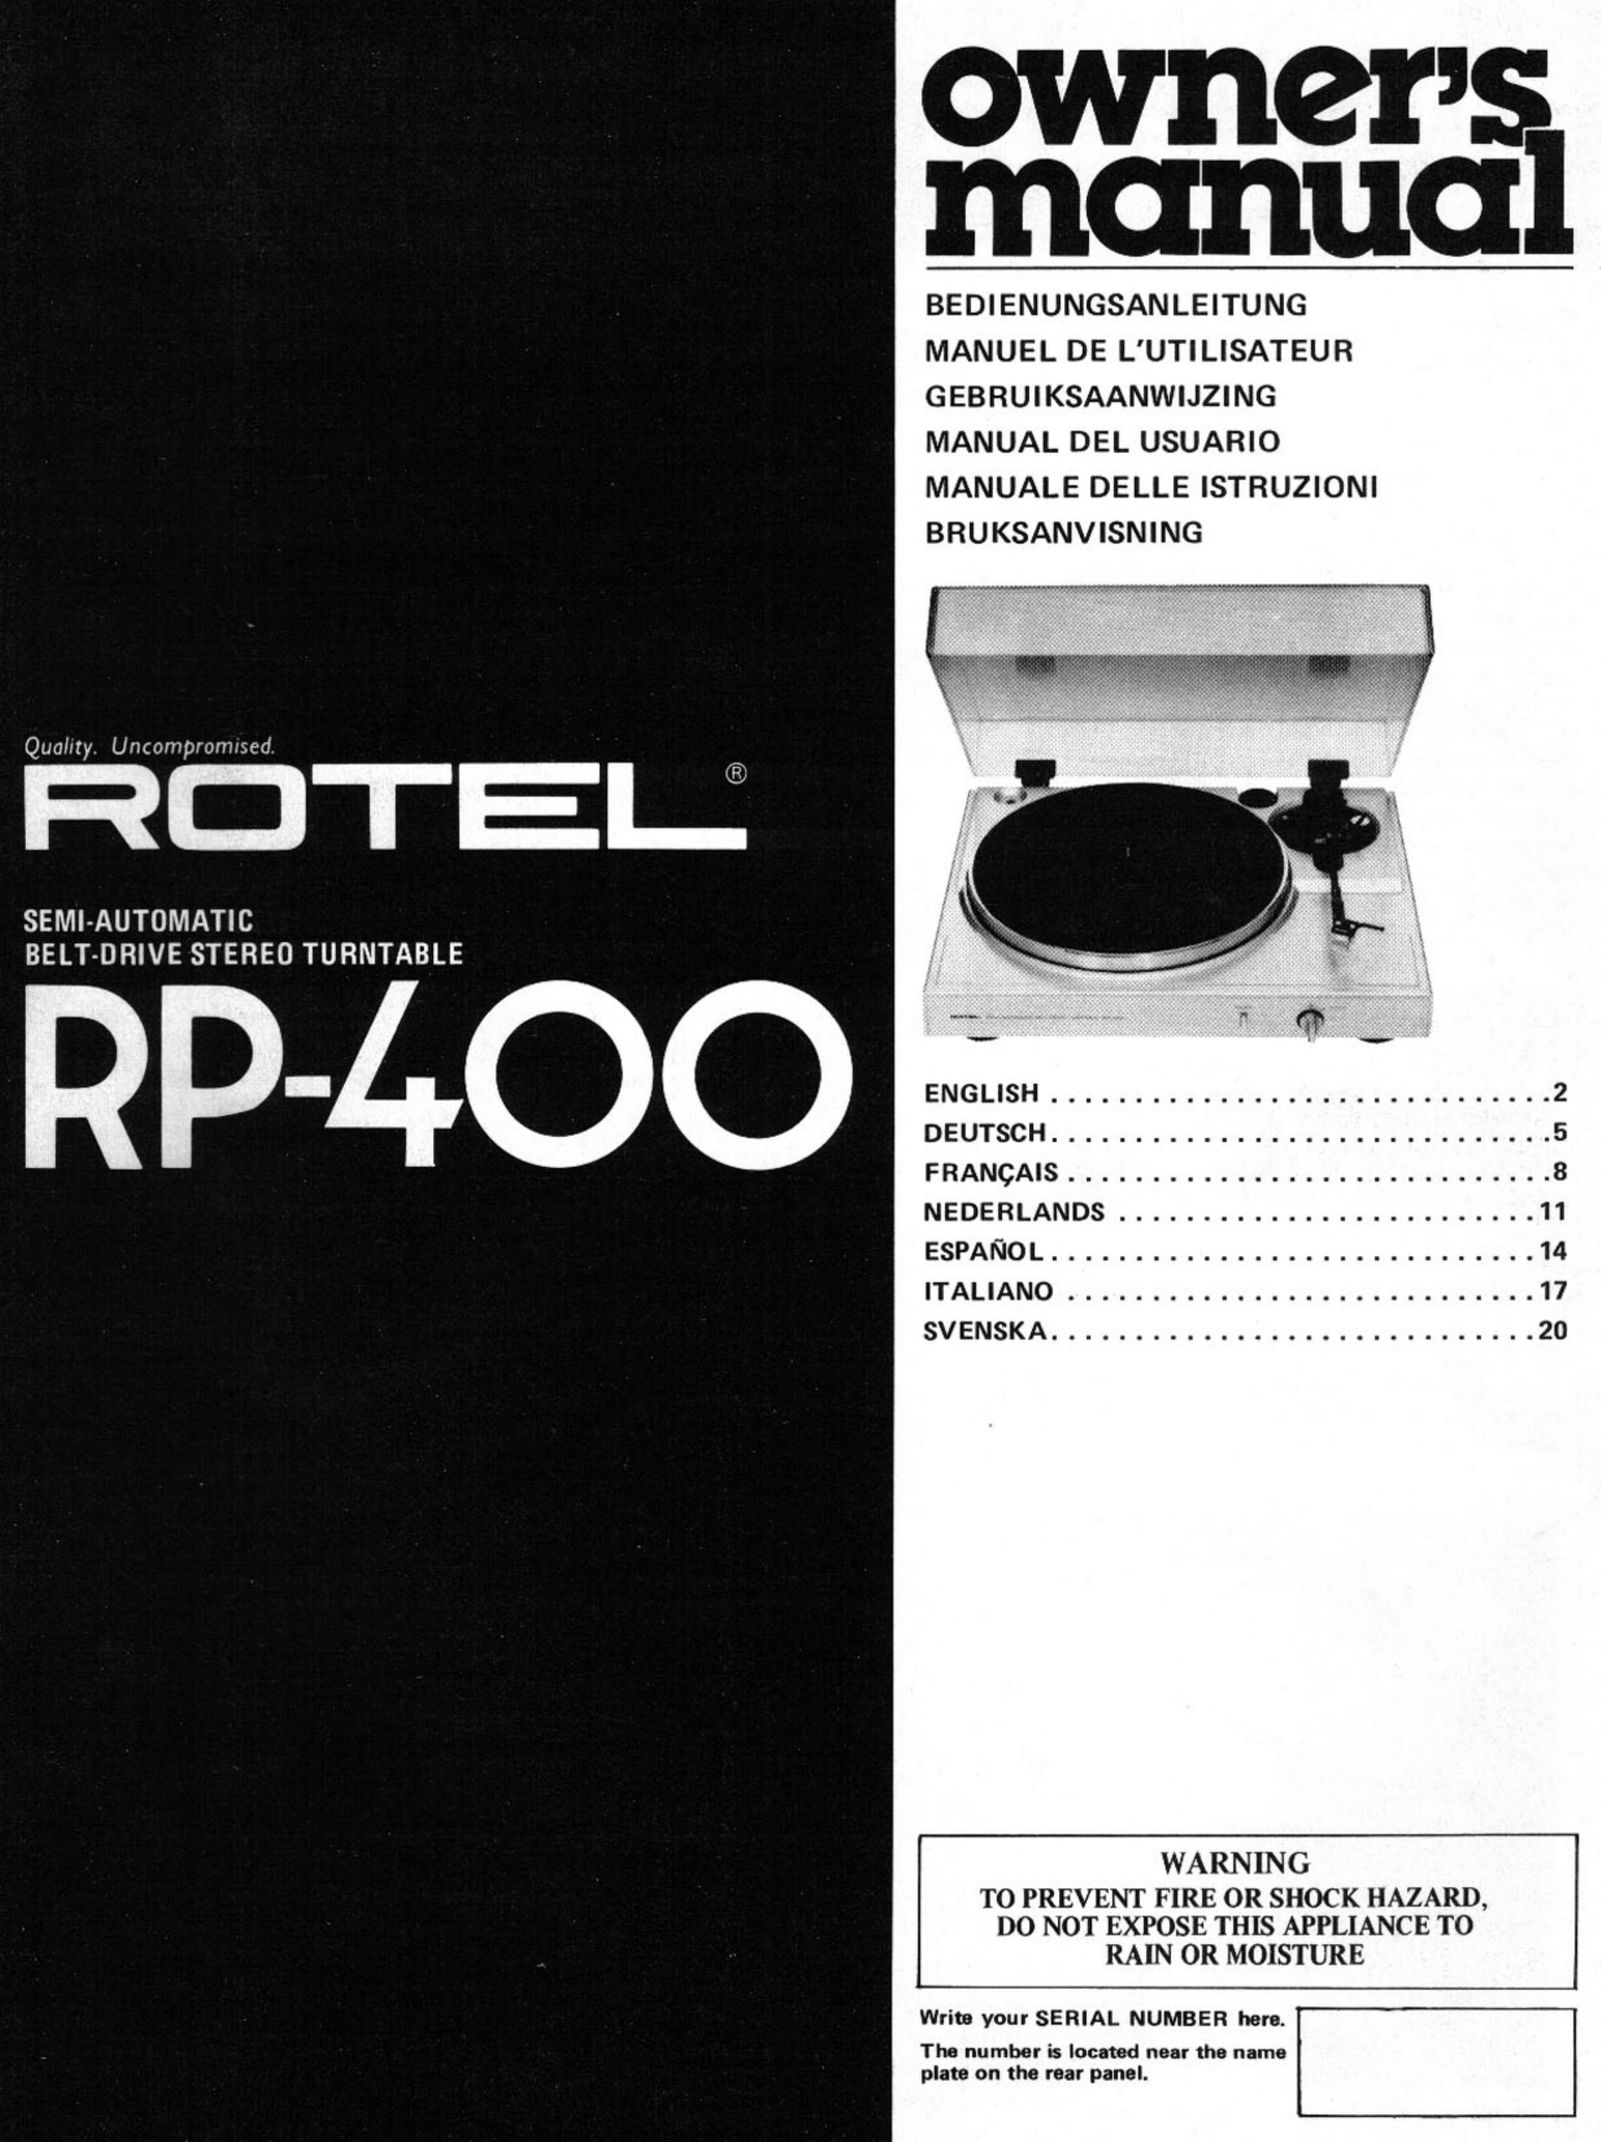 Rotel RP-400 Turntable User Manual